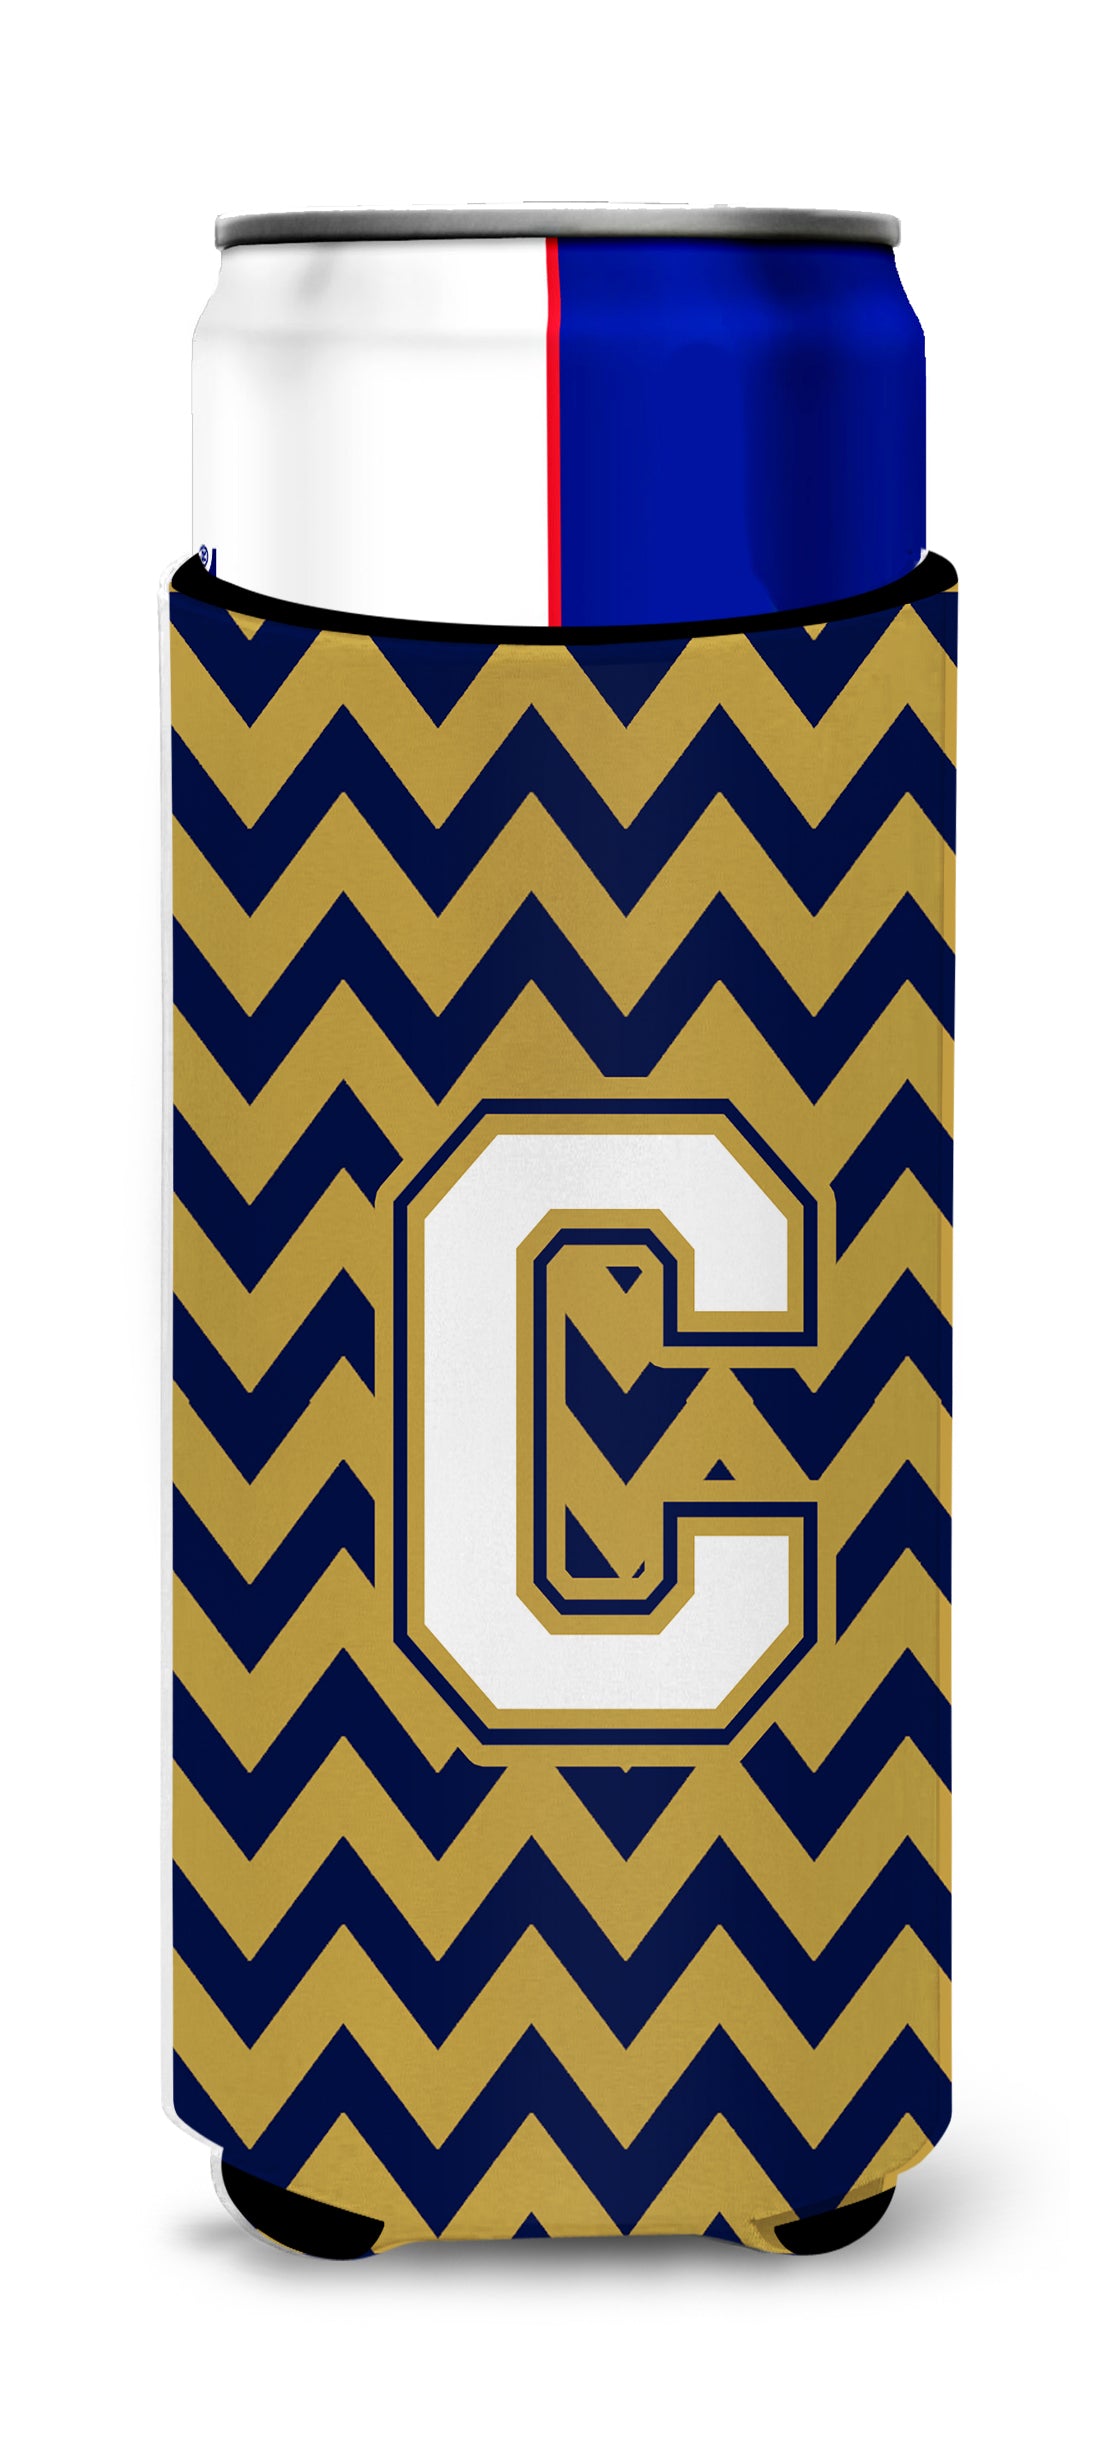 Letter C Chevron Navy Blue and Gold Ultra Beverage Insulators for slim cans CJ1057-CMUK.